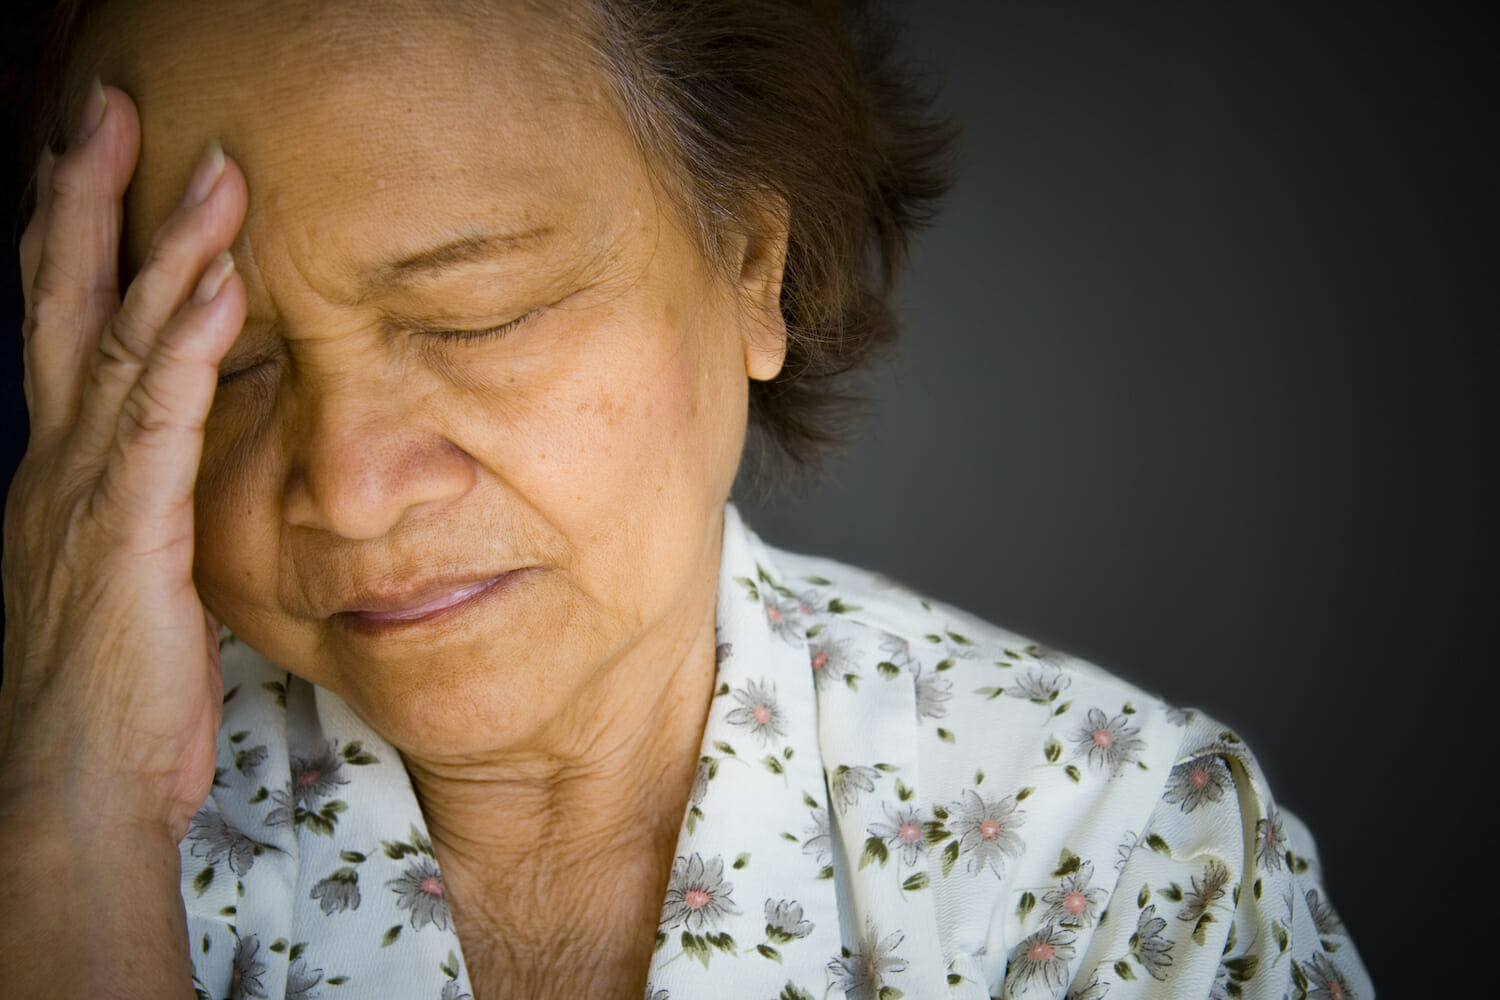 Elderly Asian woman, shallow depth of field.  Image exclusive to iStockphoto.